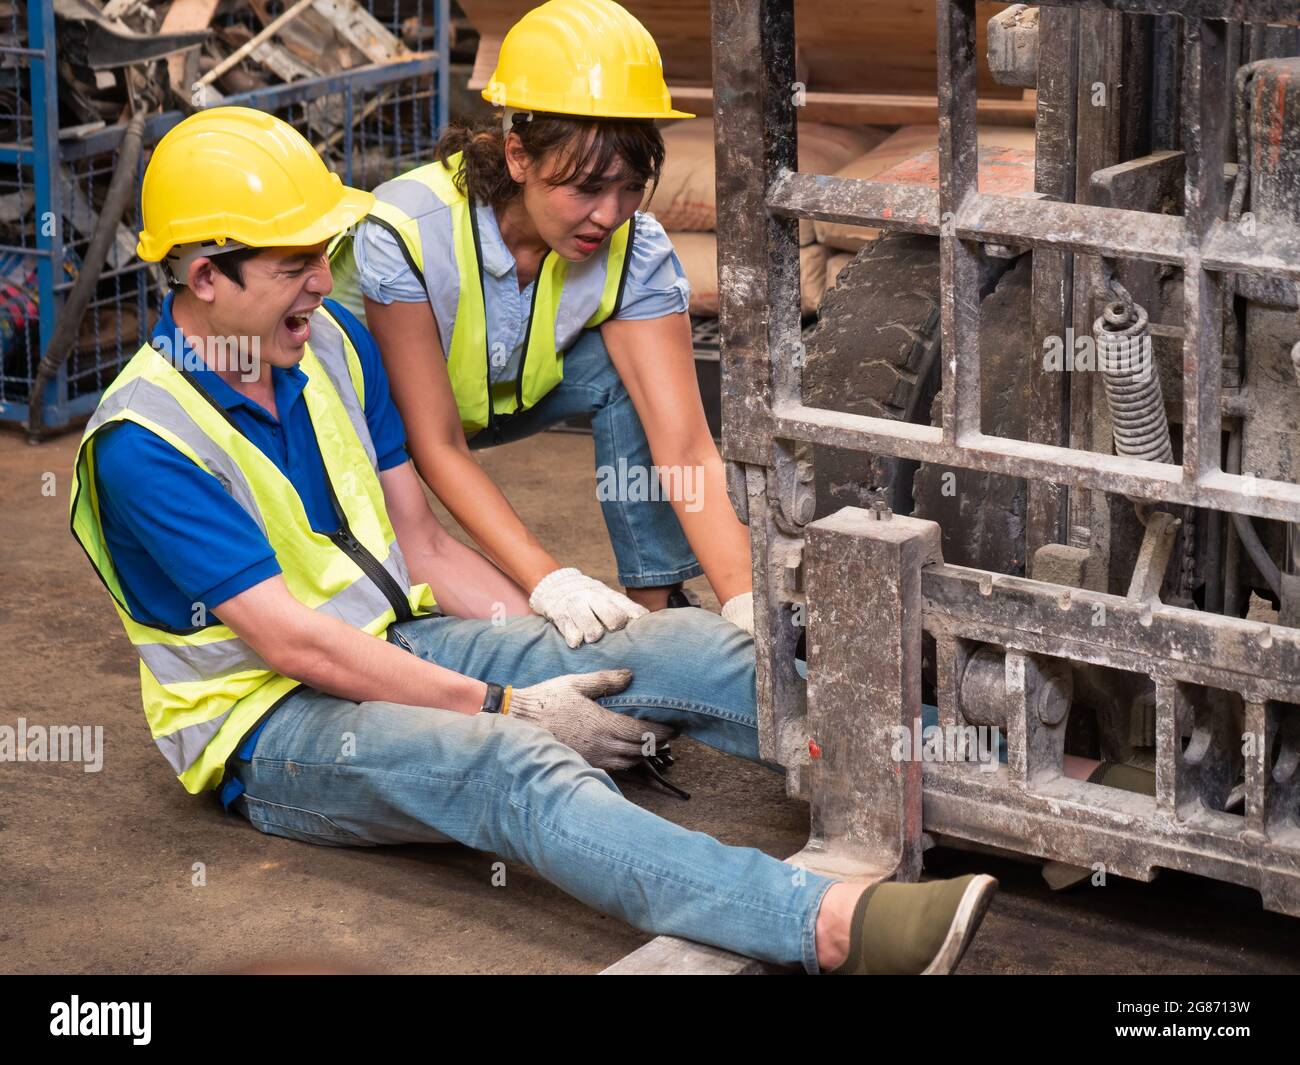 Female workers are banning cargo drivers from continuing to drive due to an accident, a male worker's leg gets stuck in a forklift's wheel while worki Stock Photo